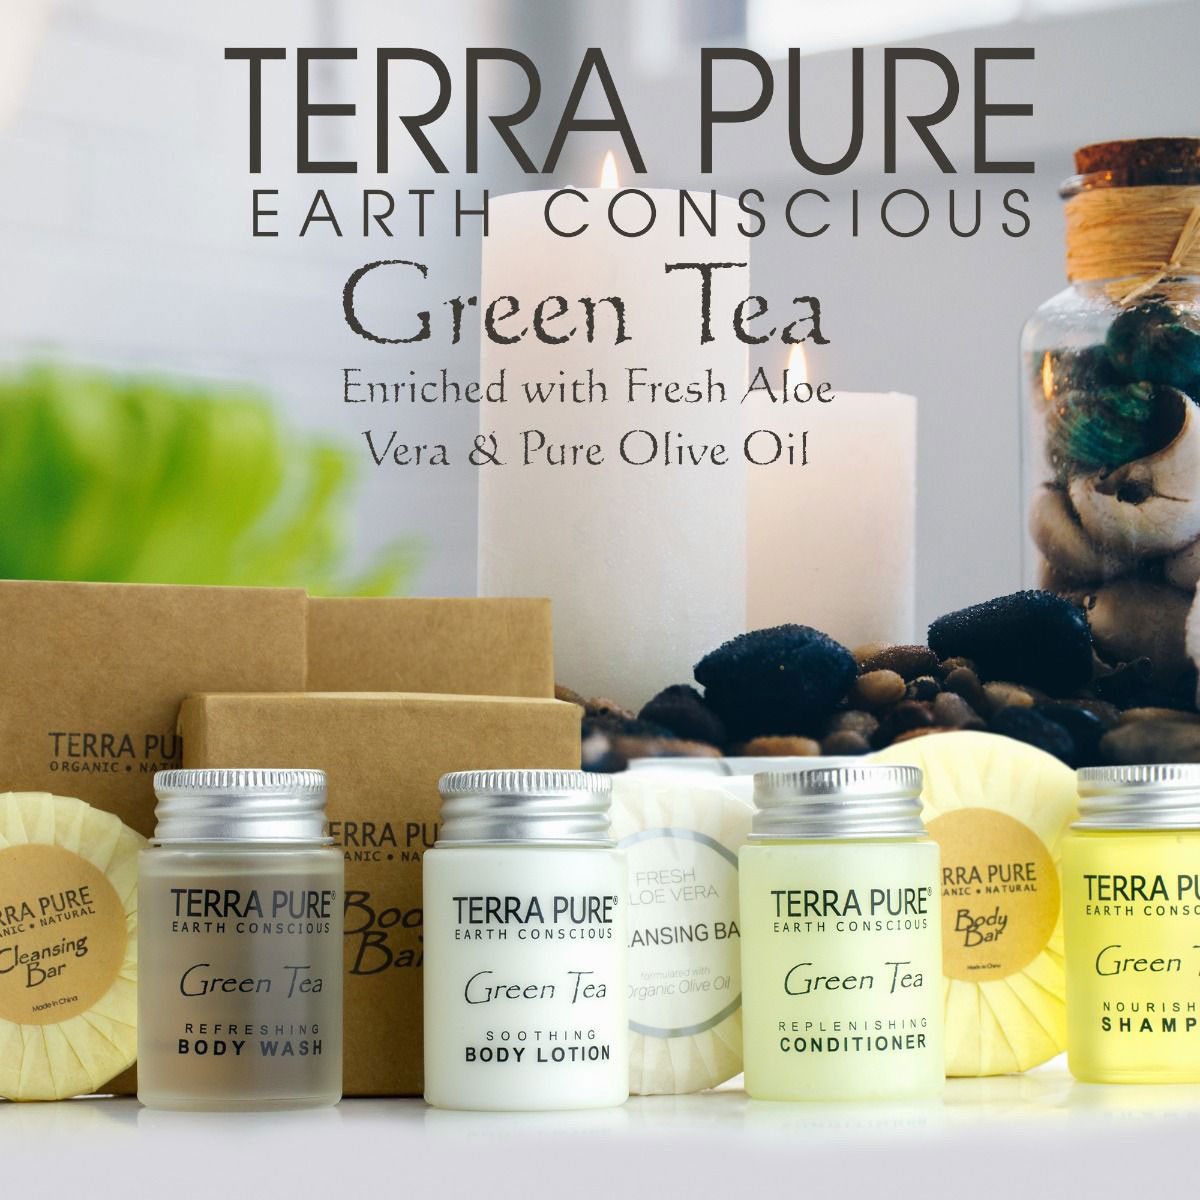 What was the primary focus for the creation of the TERRA PURE GREEN TEA Collection?